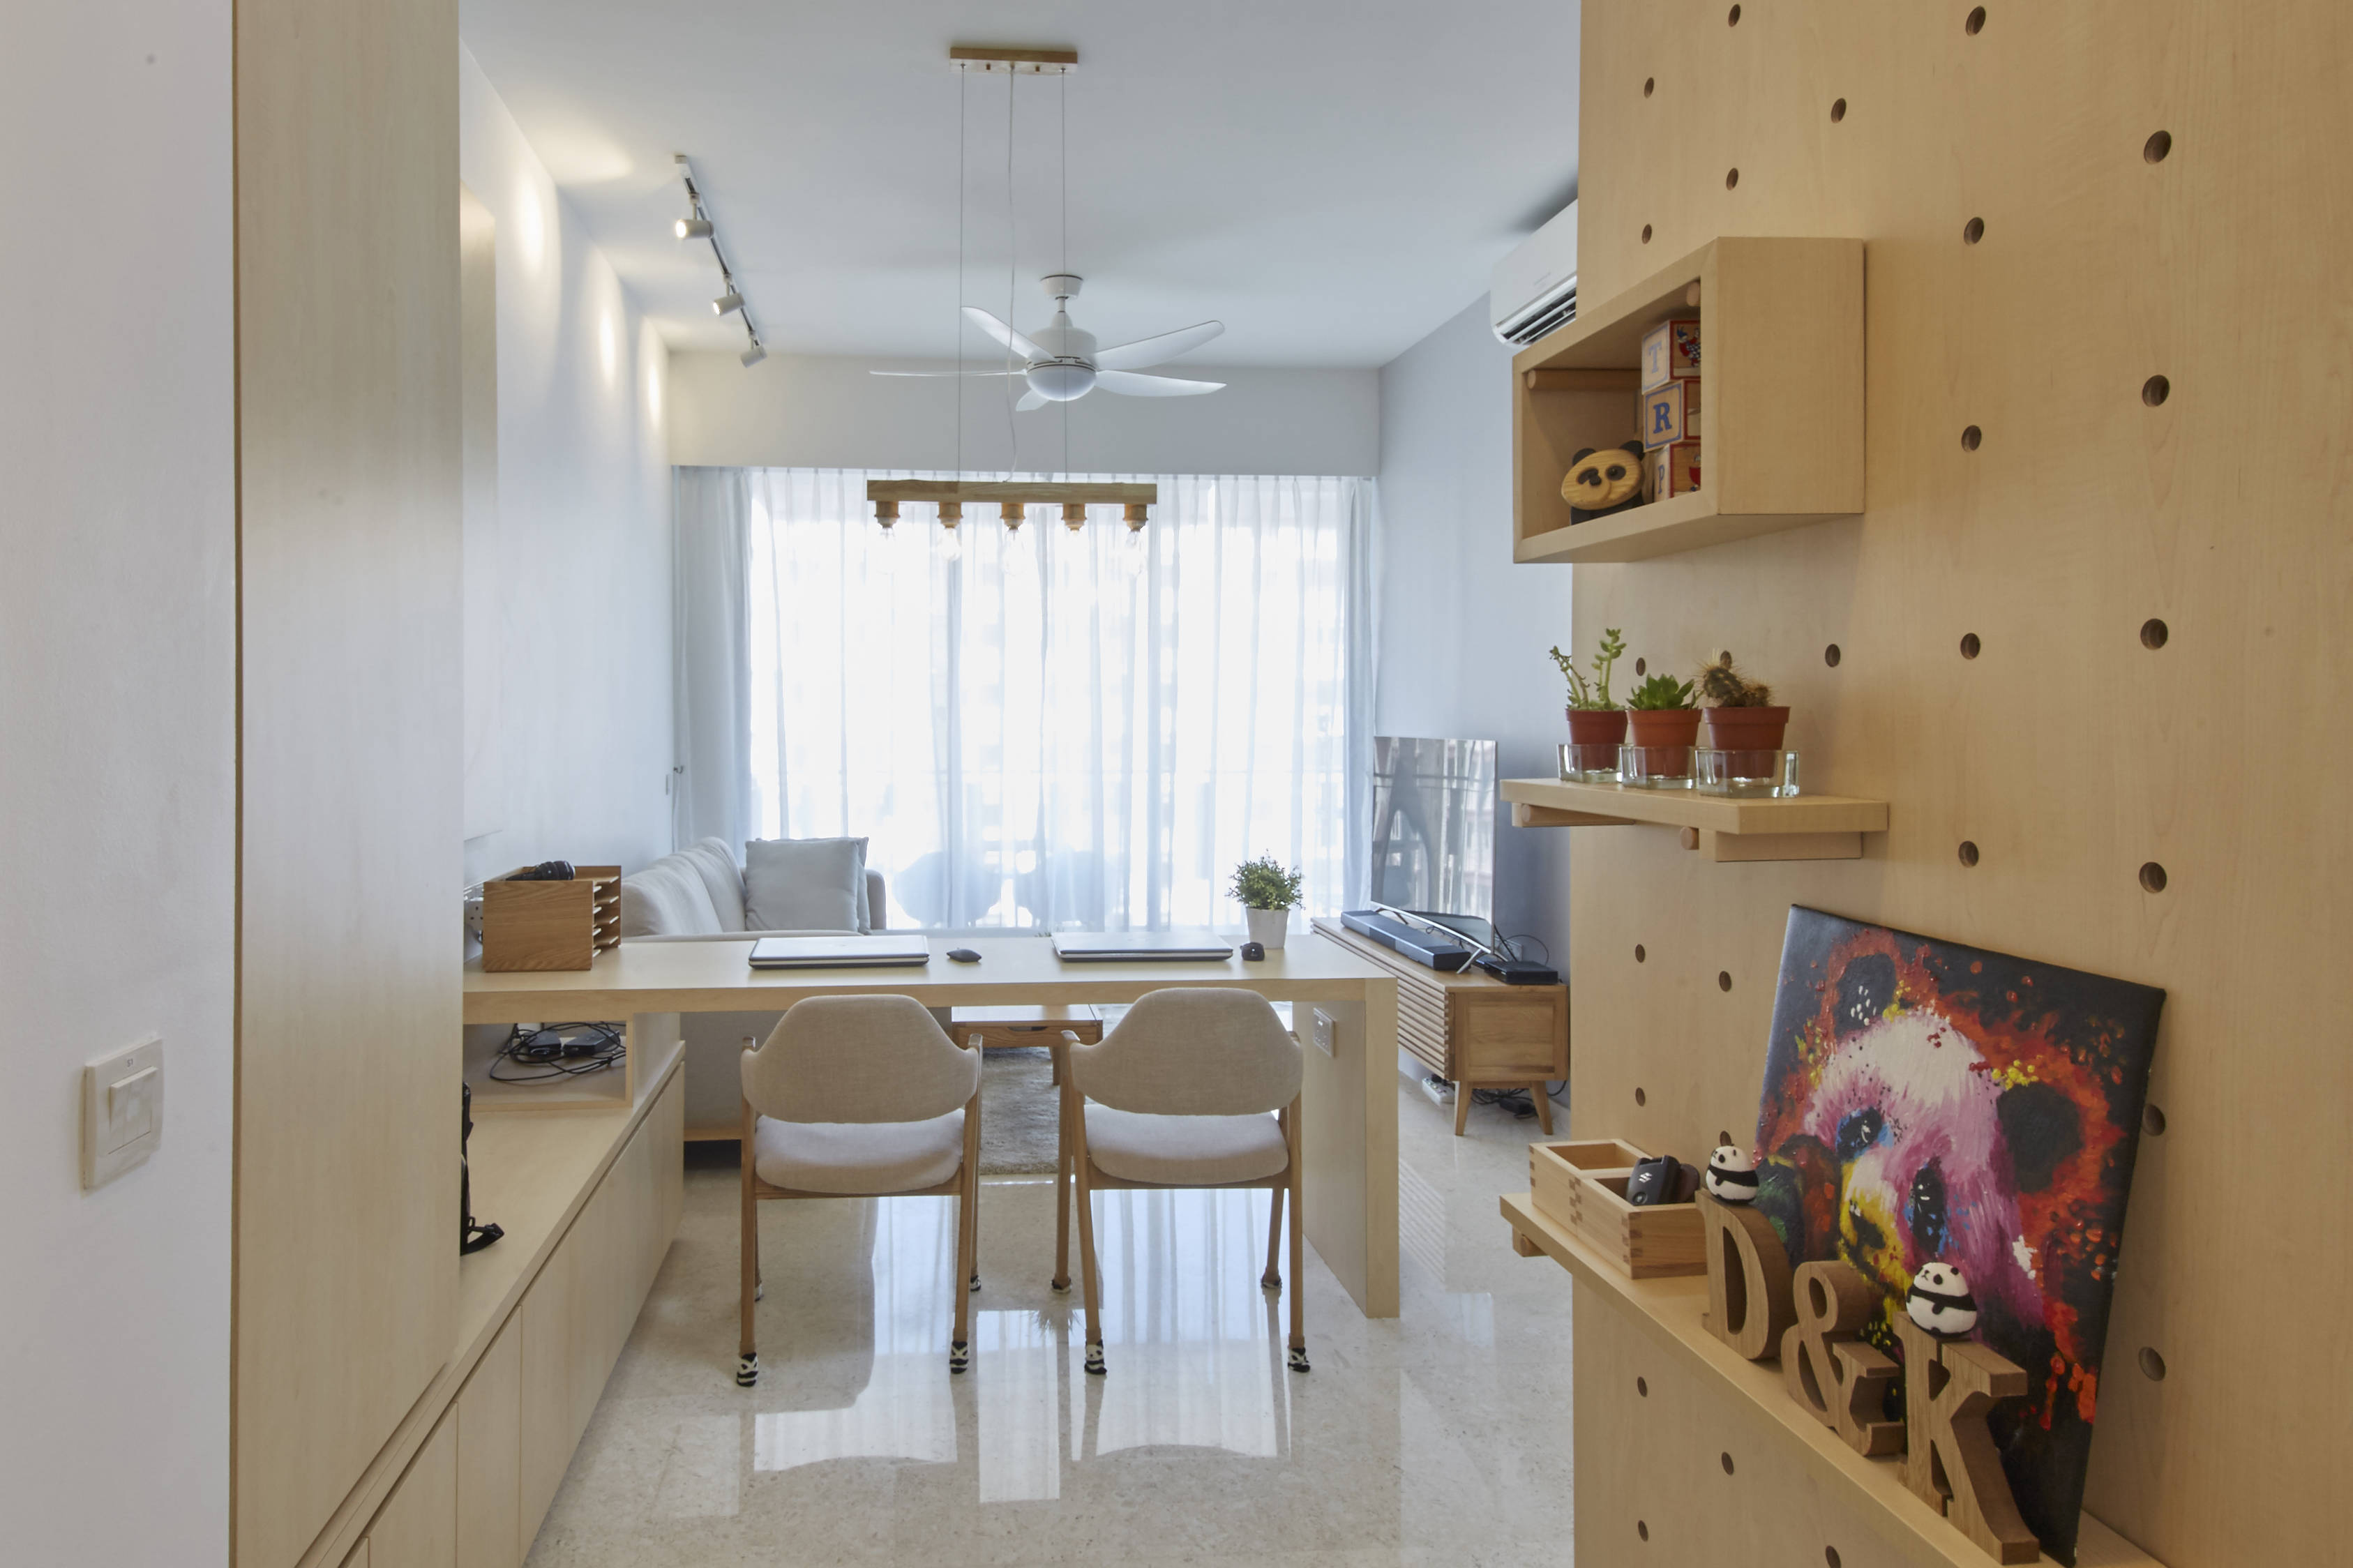 A Simple Design And Restful Feel In This 3 Bedroom Condo